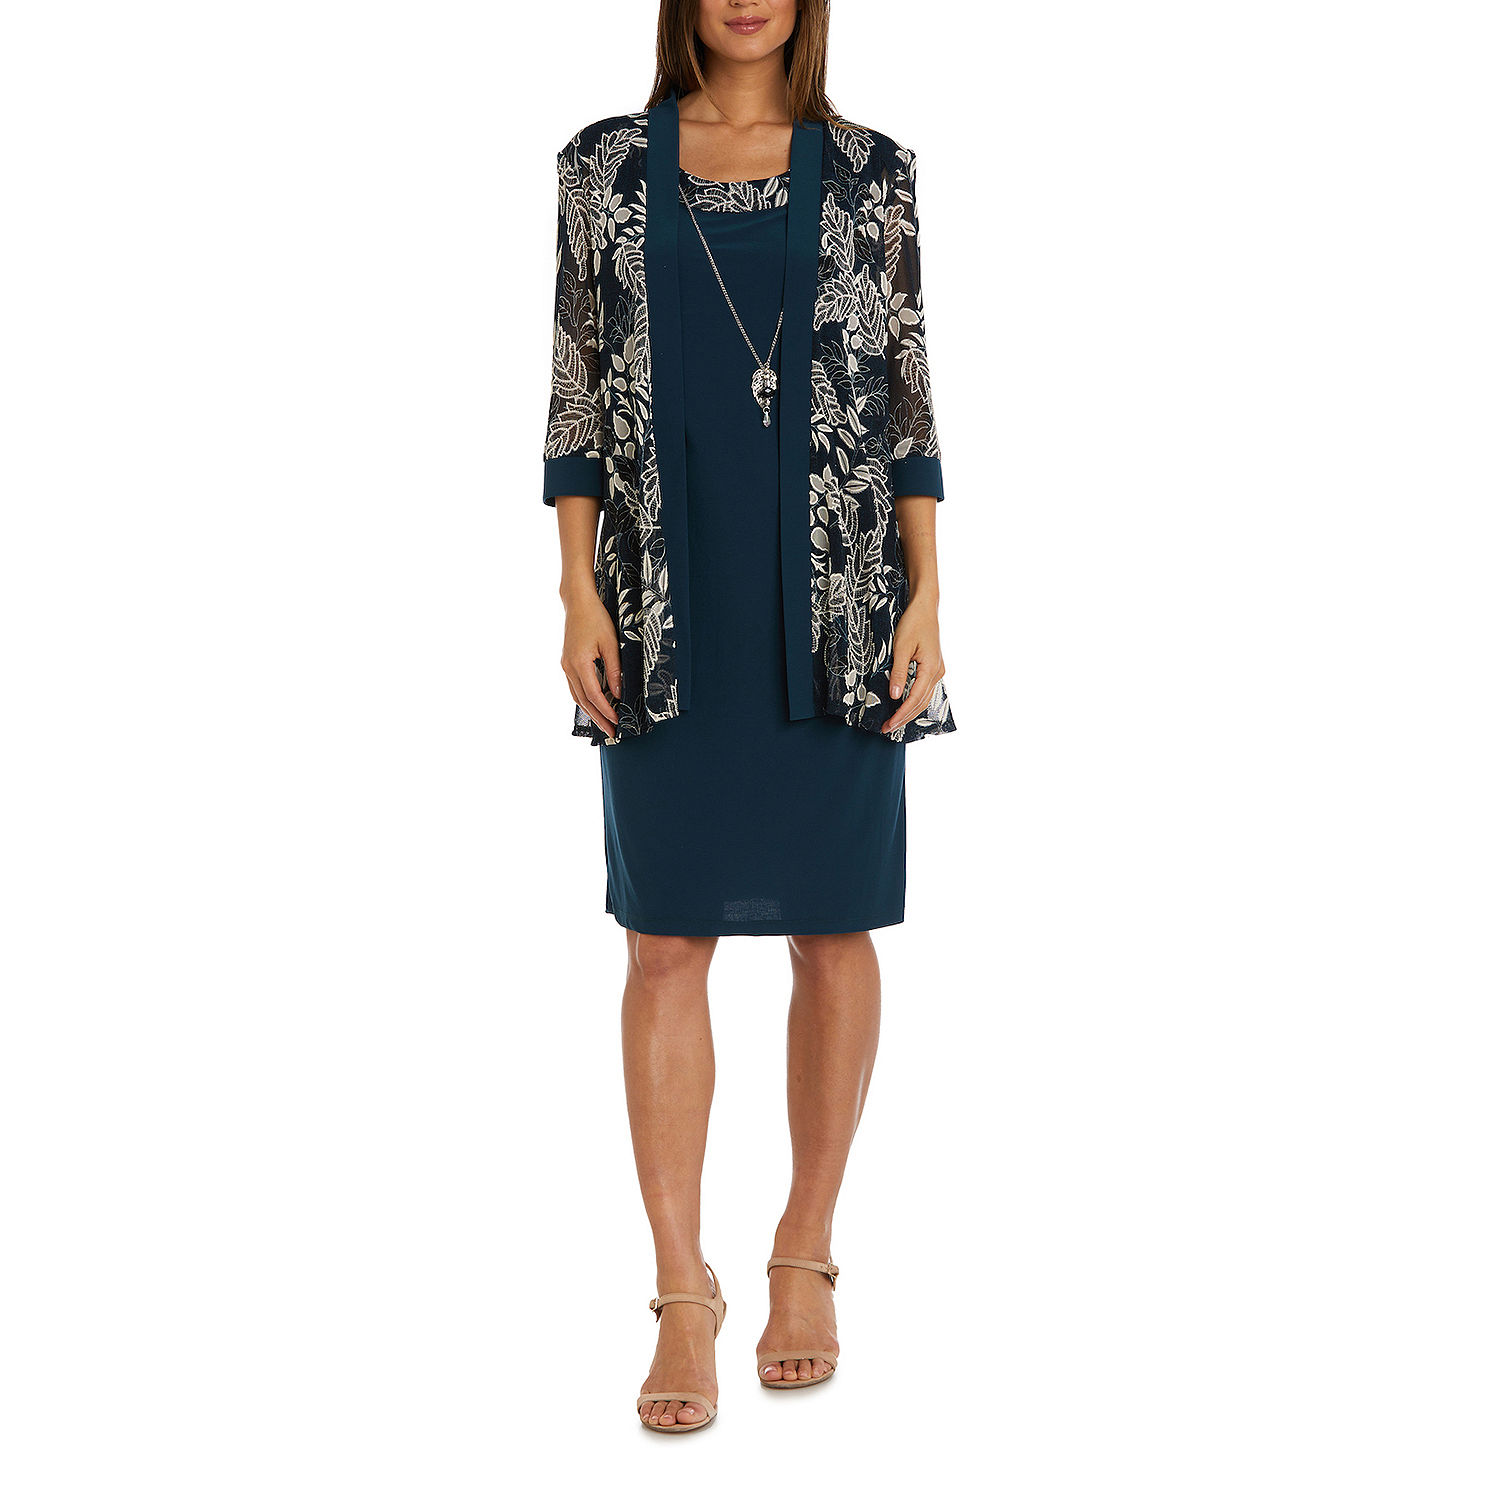 R & M Richards Jacket Dress With Removable Necklace, Color: Teal - JCPenney